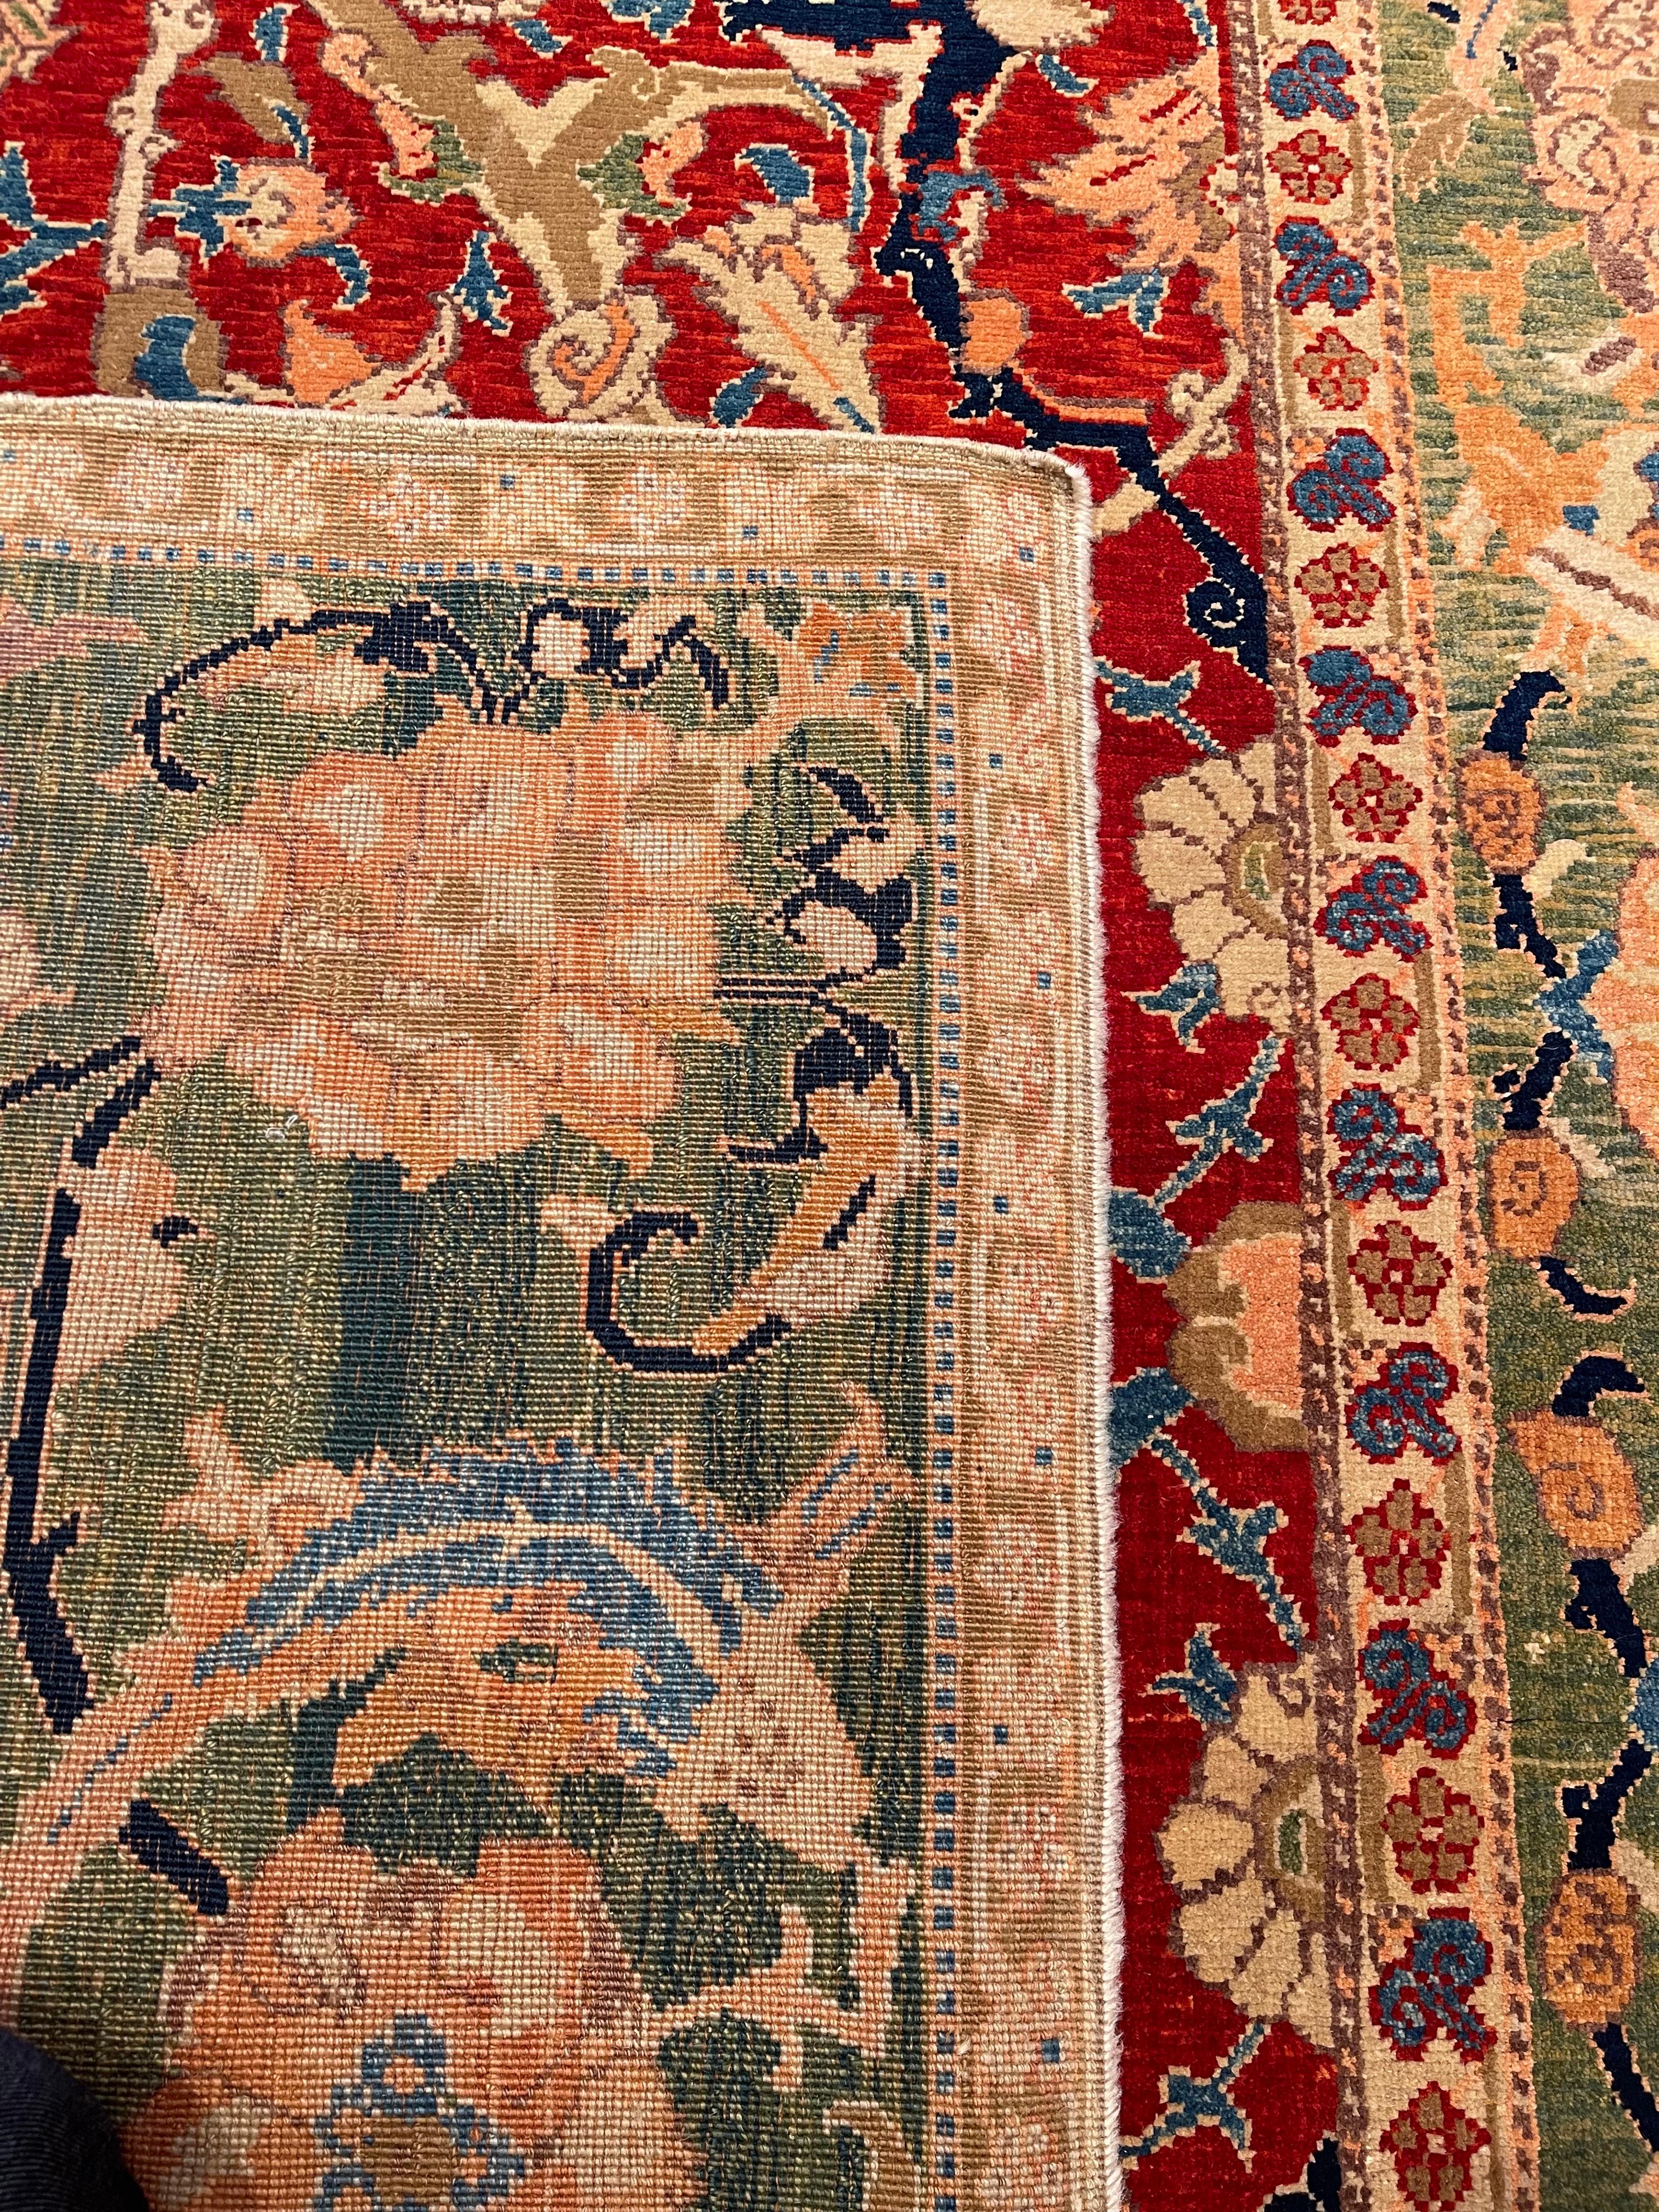 Turkish Ararat Rugs Polonaise Carpet, 17th Century Museum Piece Revival, Natural Dyed For Sale